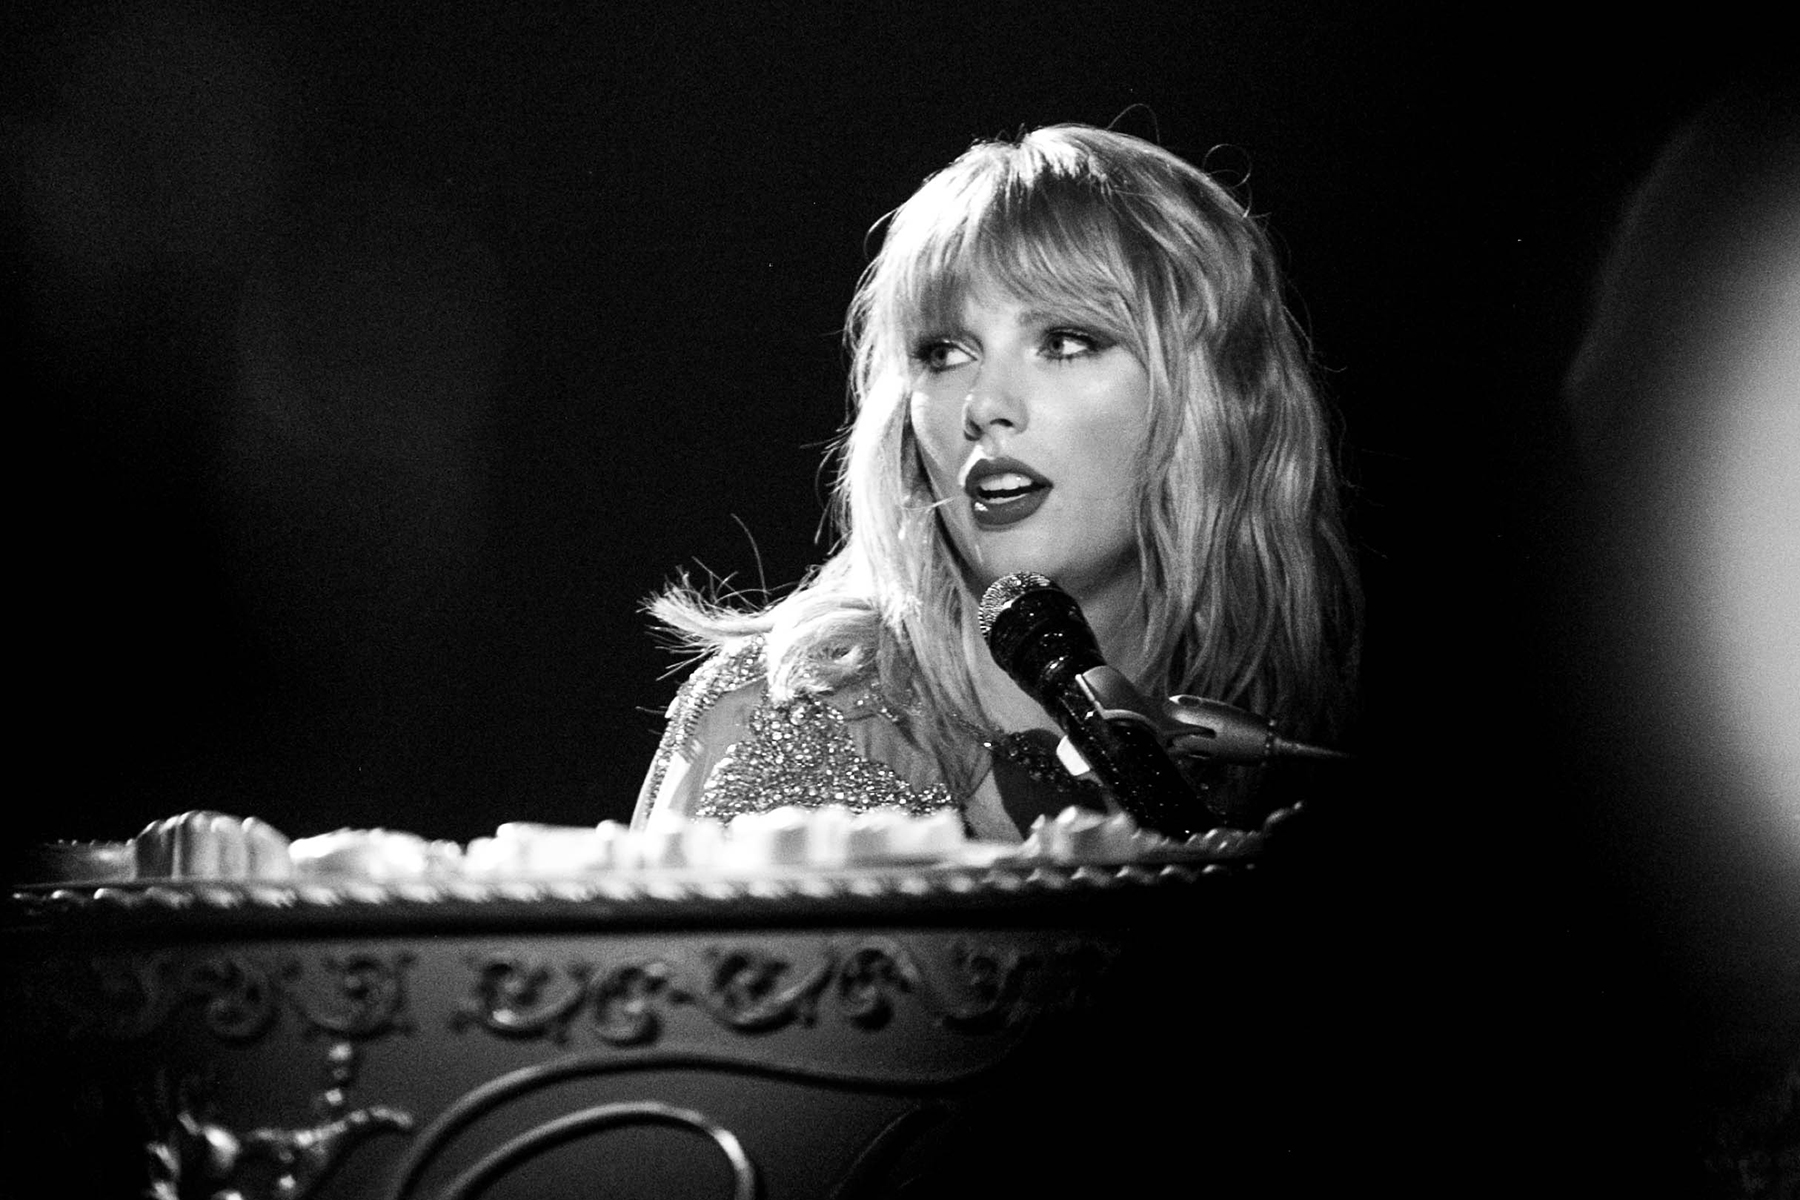 LOS ANGELES, CALIFORNIA - NOVEMBER 24: (EDITORS NOTE: Image has been converted to black and white) Taylor Swift performs onstage at the 2019 American Music Awards at Microsoft Theater on November 24, 2019 in Los Angeles, California. (Photo by Emma McIntyre/AMA2019/Getty Images for dcp)